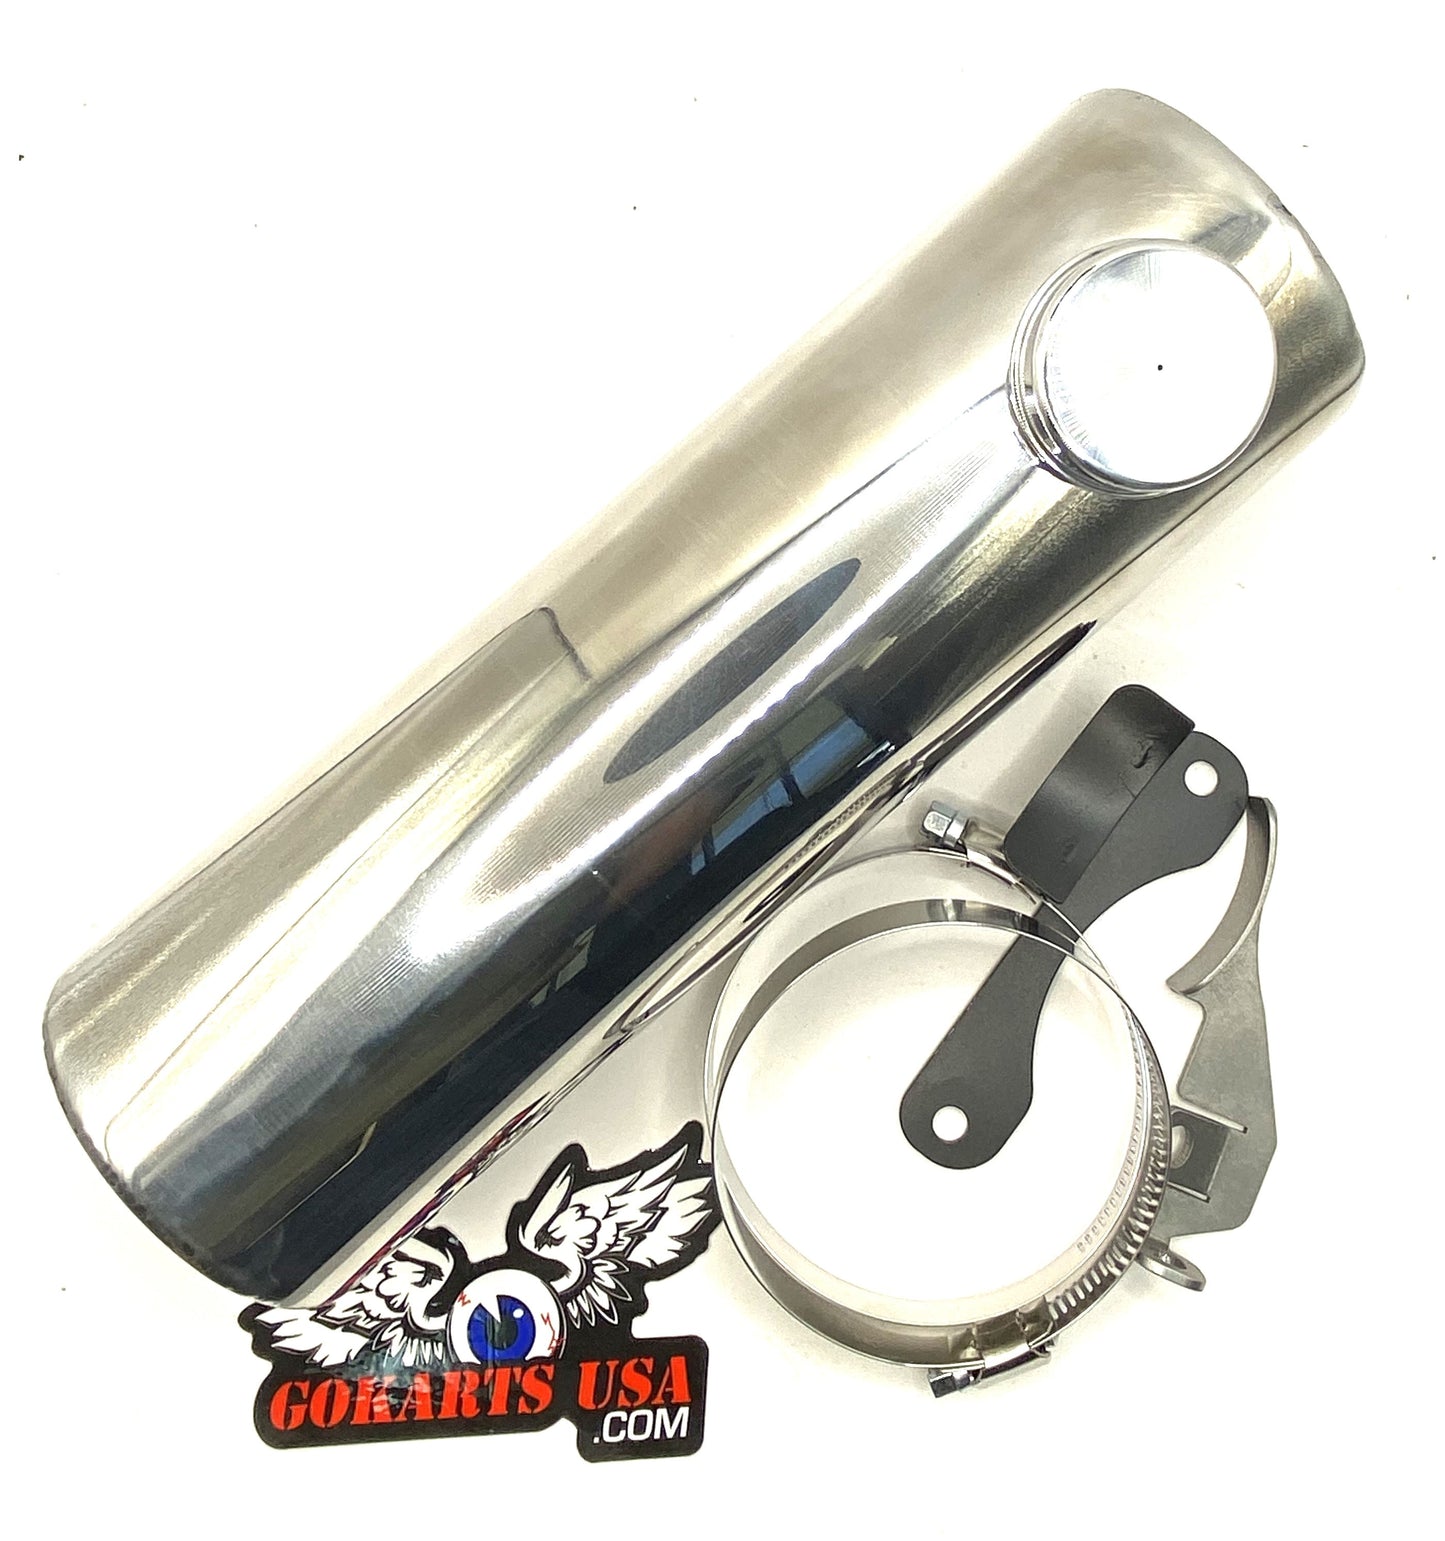 Mounting Kit, for 3.5" Cylindrical Minibike Gas Tank on Predator 212 and Ghost